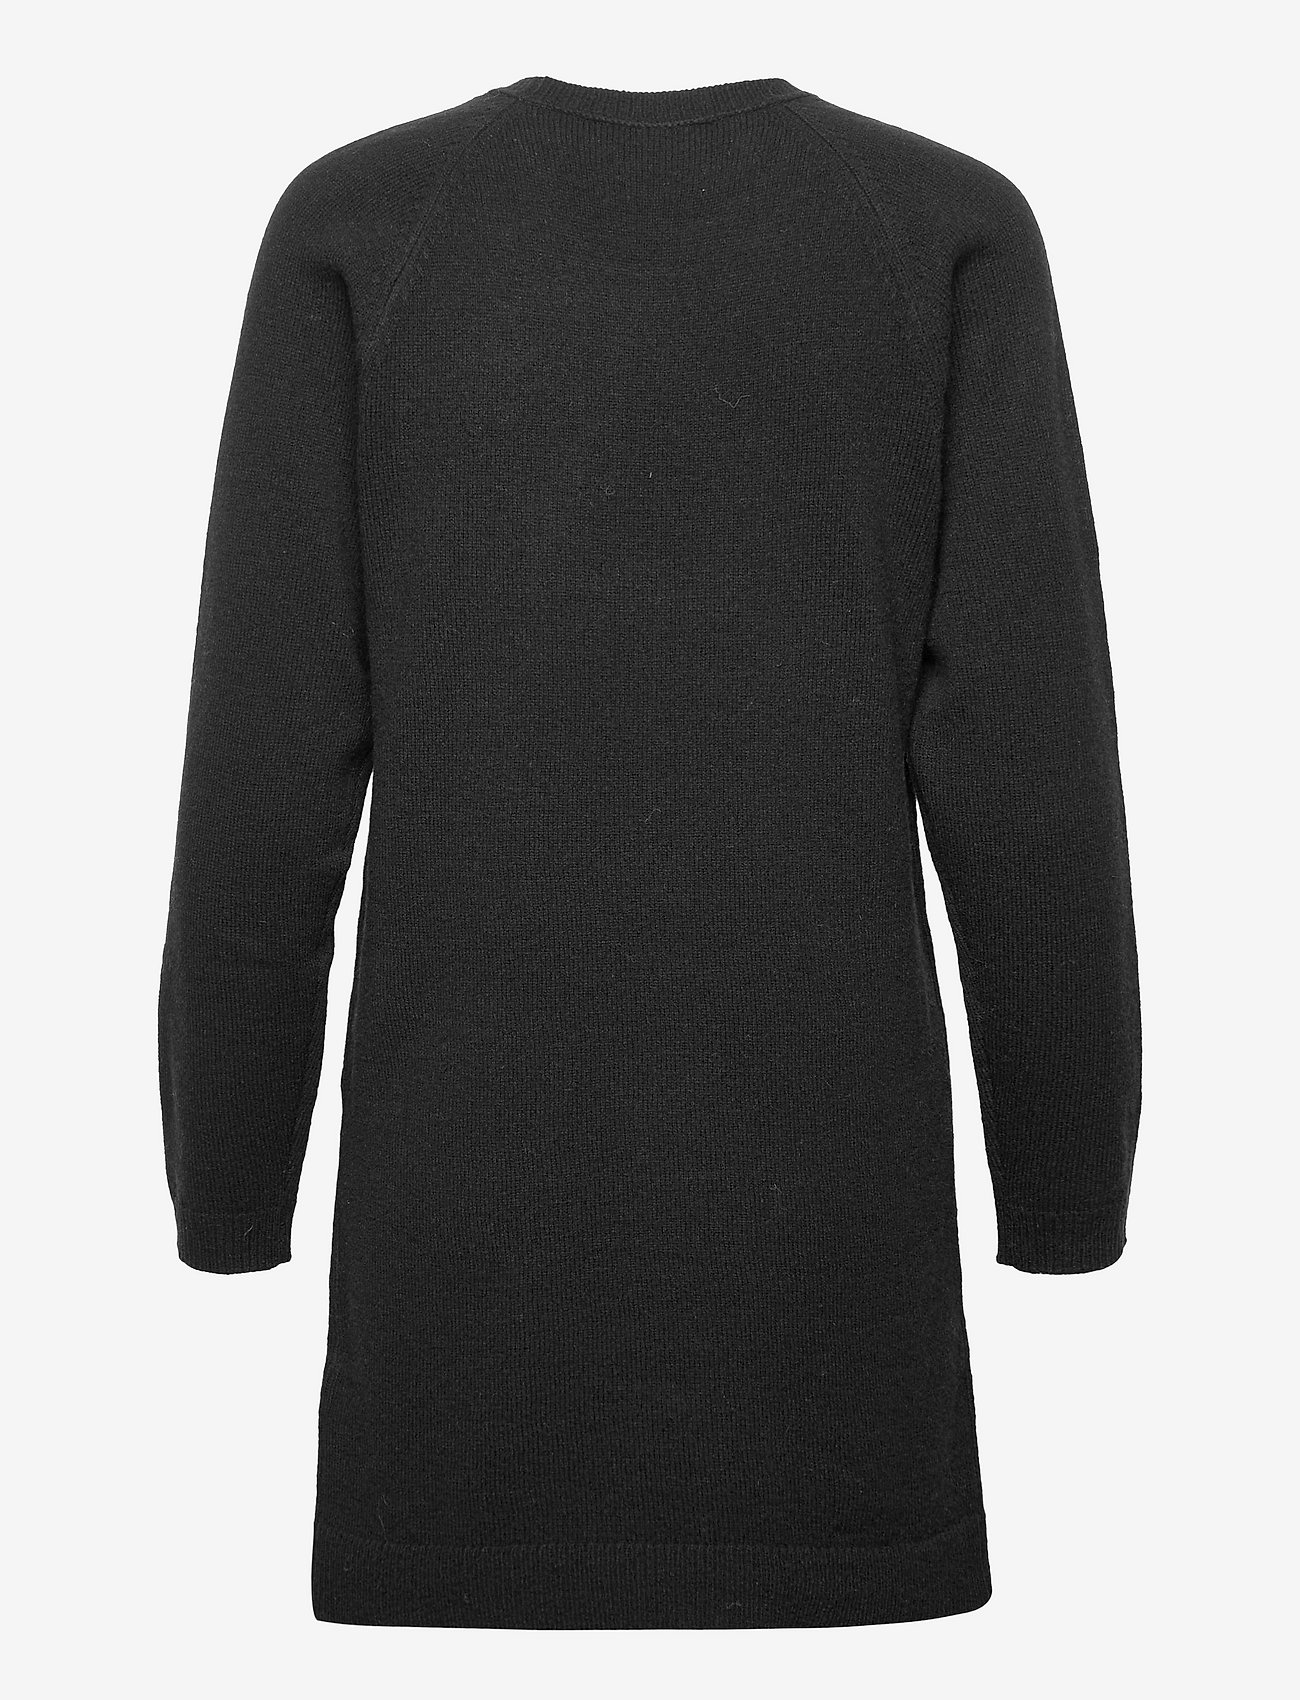 Double A by Wood Wood - Anne lambswool dress - knitted dresses - black - 1